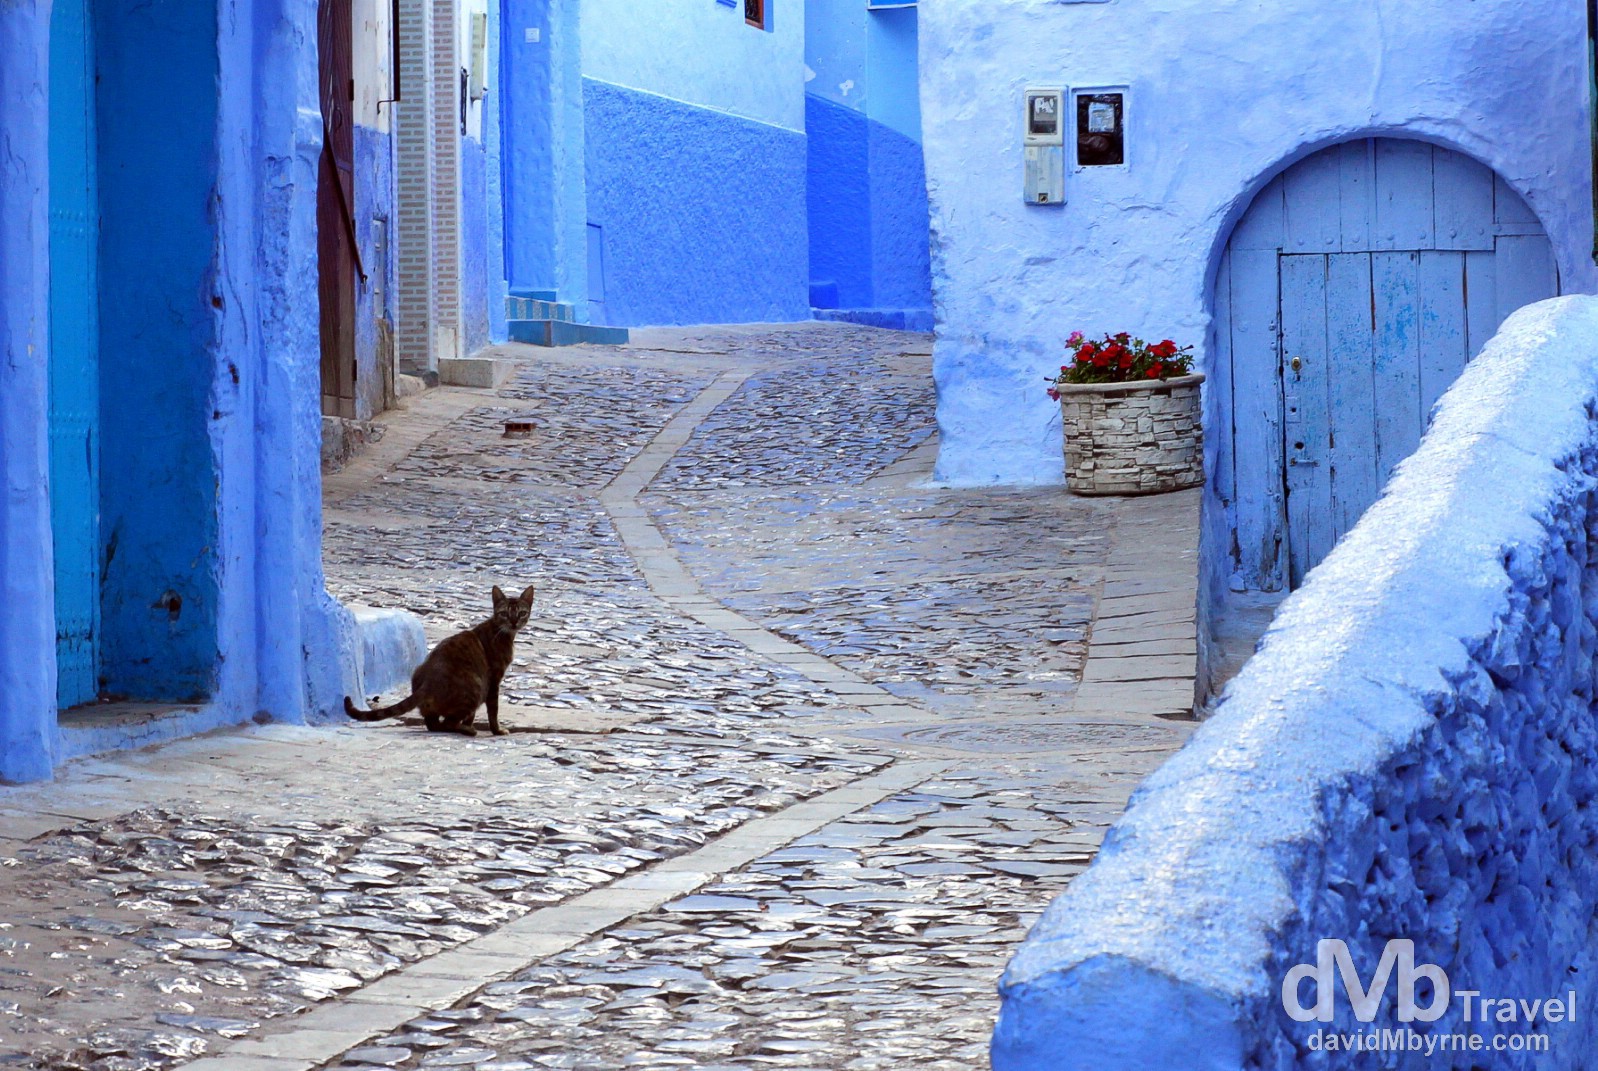 A cat in the early morning lanes of the medina in Chefchaouen, Morocco. June 1st, 2014. 